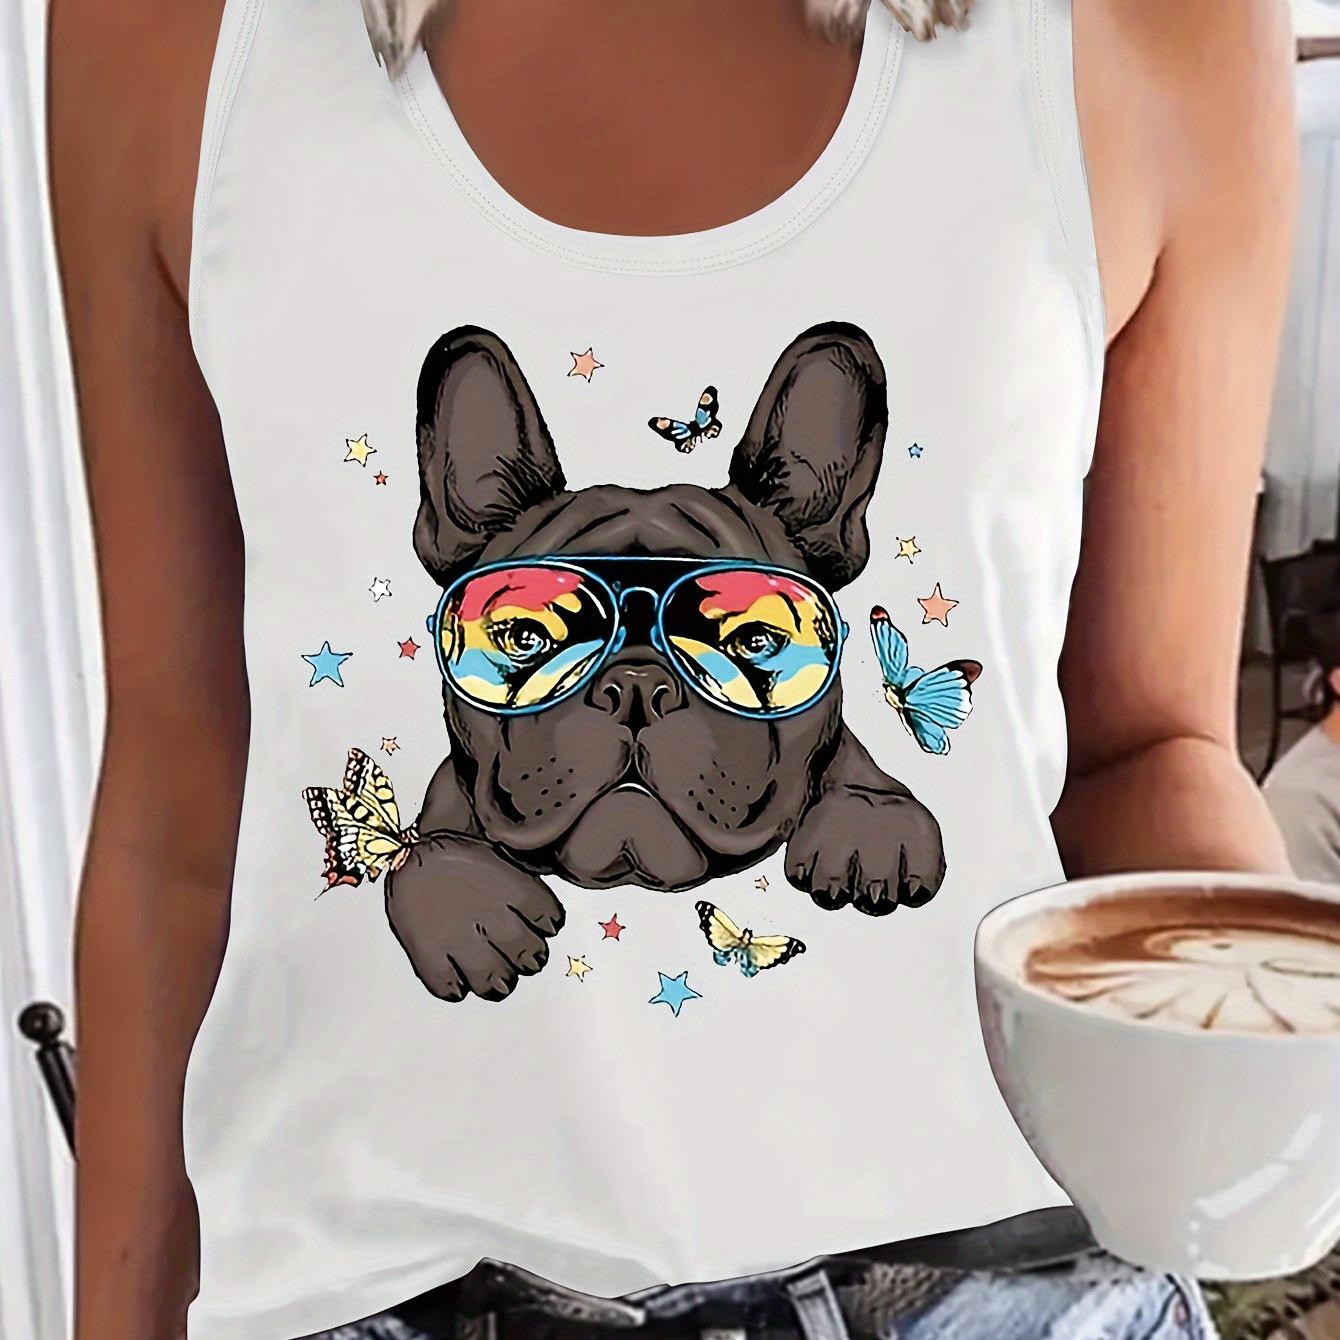 

Dog Print Crew Neck Tank Top, Sleeveless Casual Top For Summer & Spring, Women's Clothing